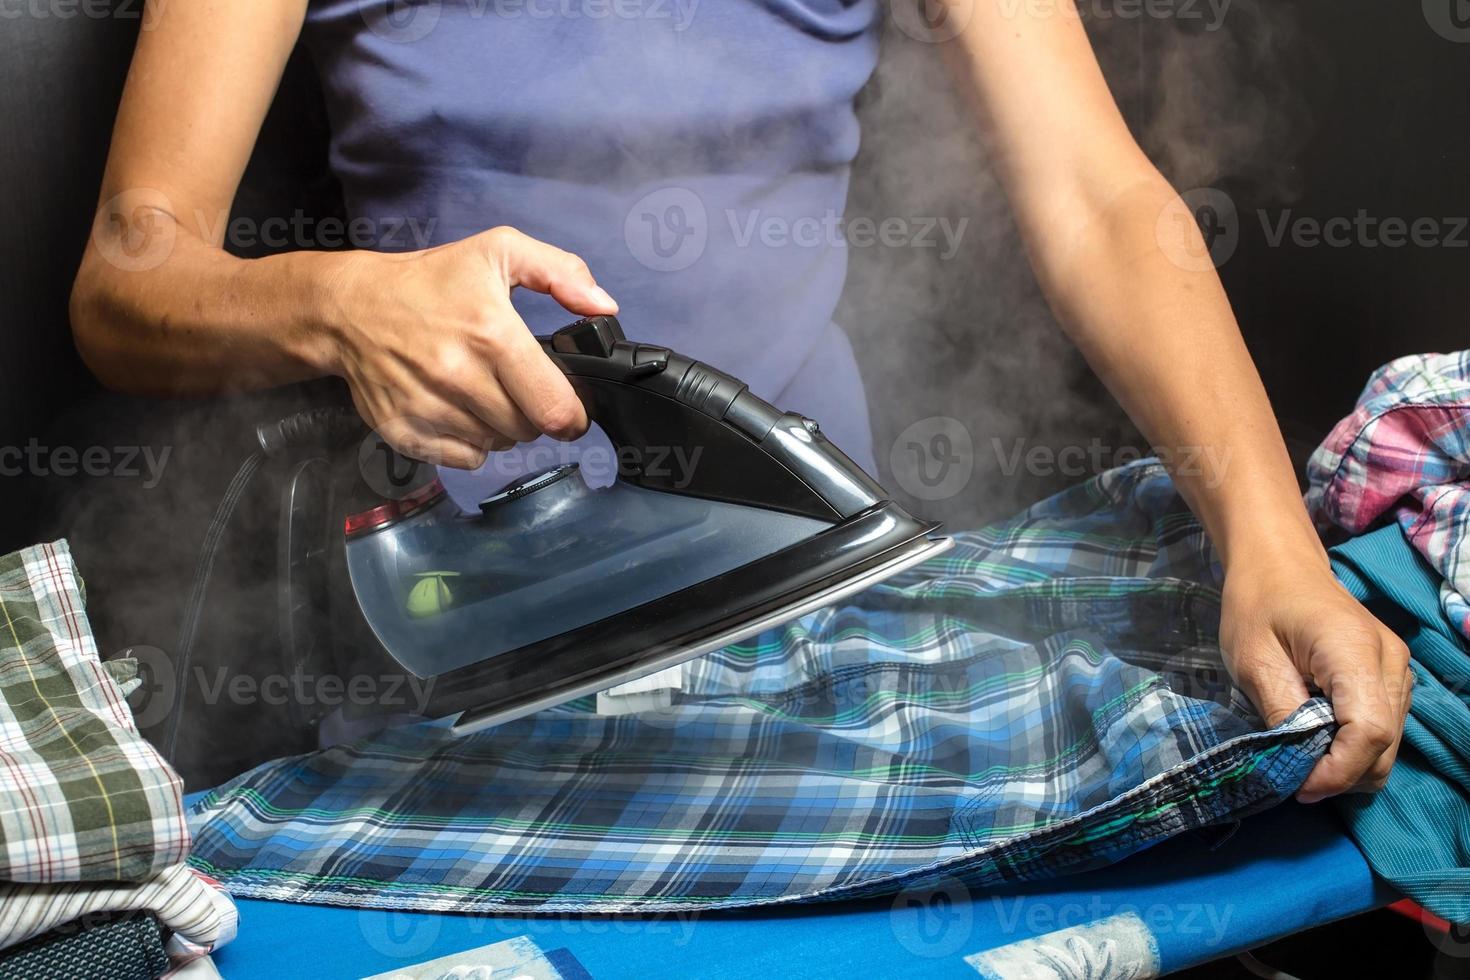 Woman is ironing clean clothes with a hot iron and steam, neatly folded shirts lie nearby. Household chores. photo